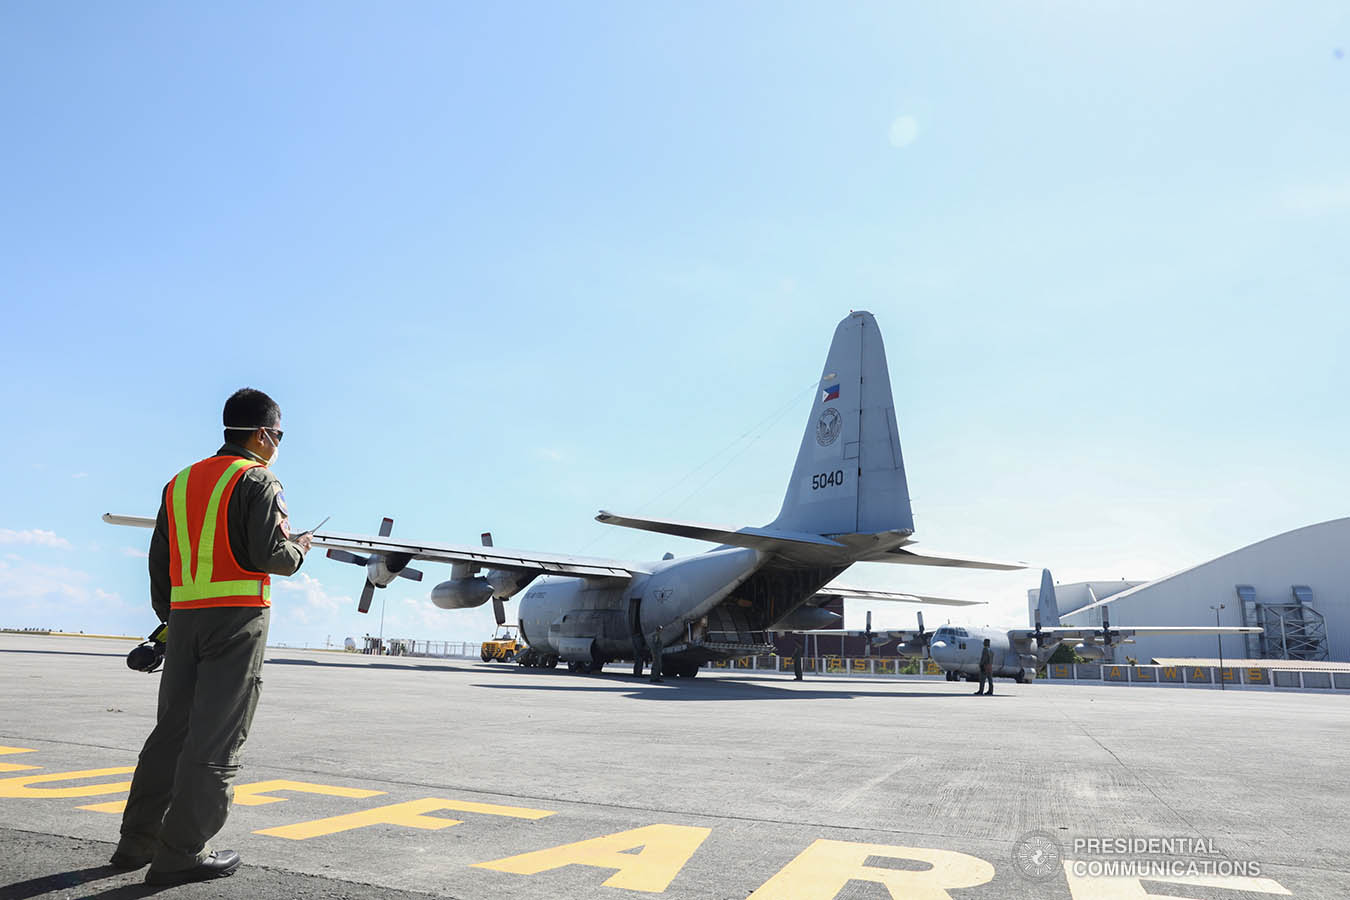 Thousands of aid packages donated by the People's Republic of China are unloaded at the Villamor Air Base in Pasay City on March 21, 2020. The donation includes assorted medical supplies, personal protective equipment, and testing kits for coronavirus. TOTO LOZANO/PRESIDENTIAL PHOTO